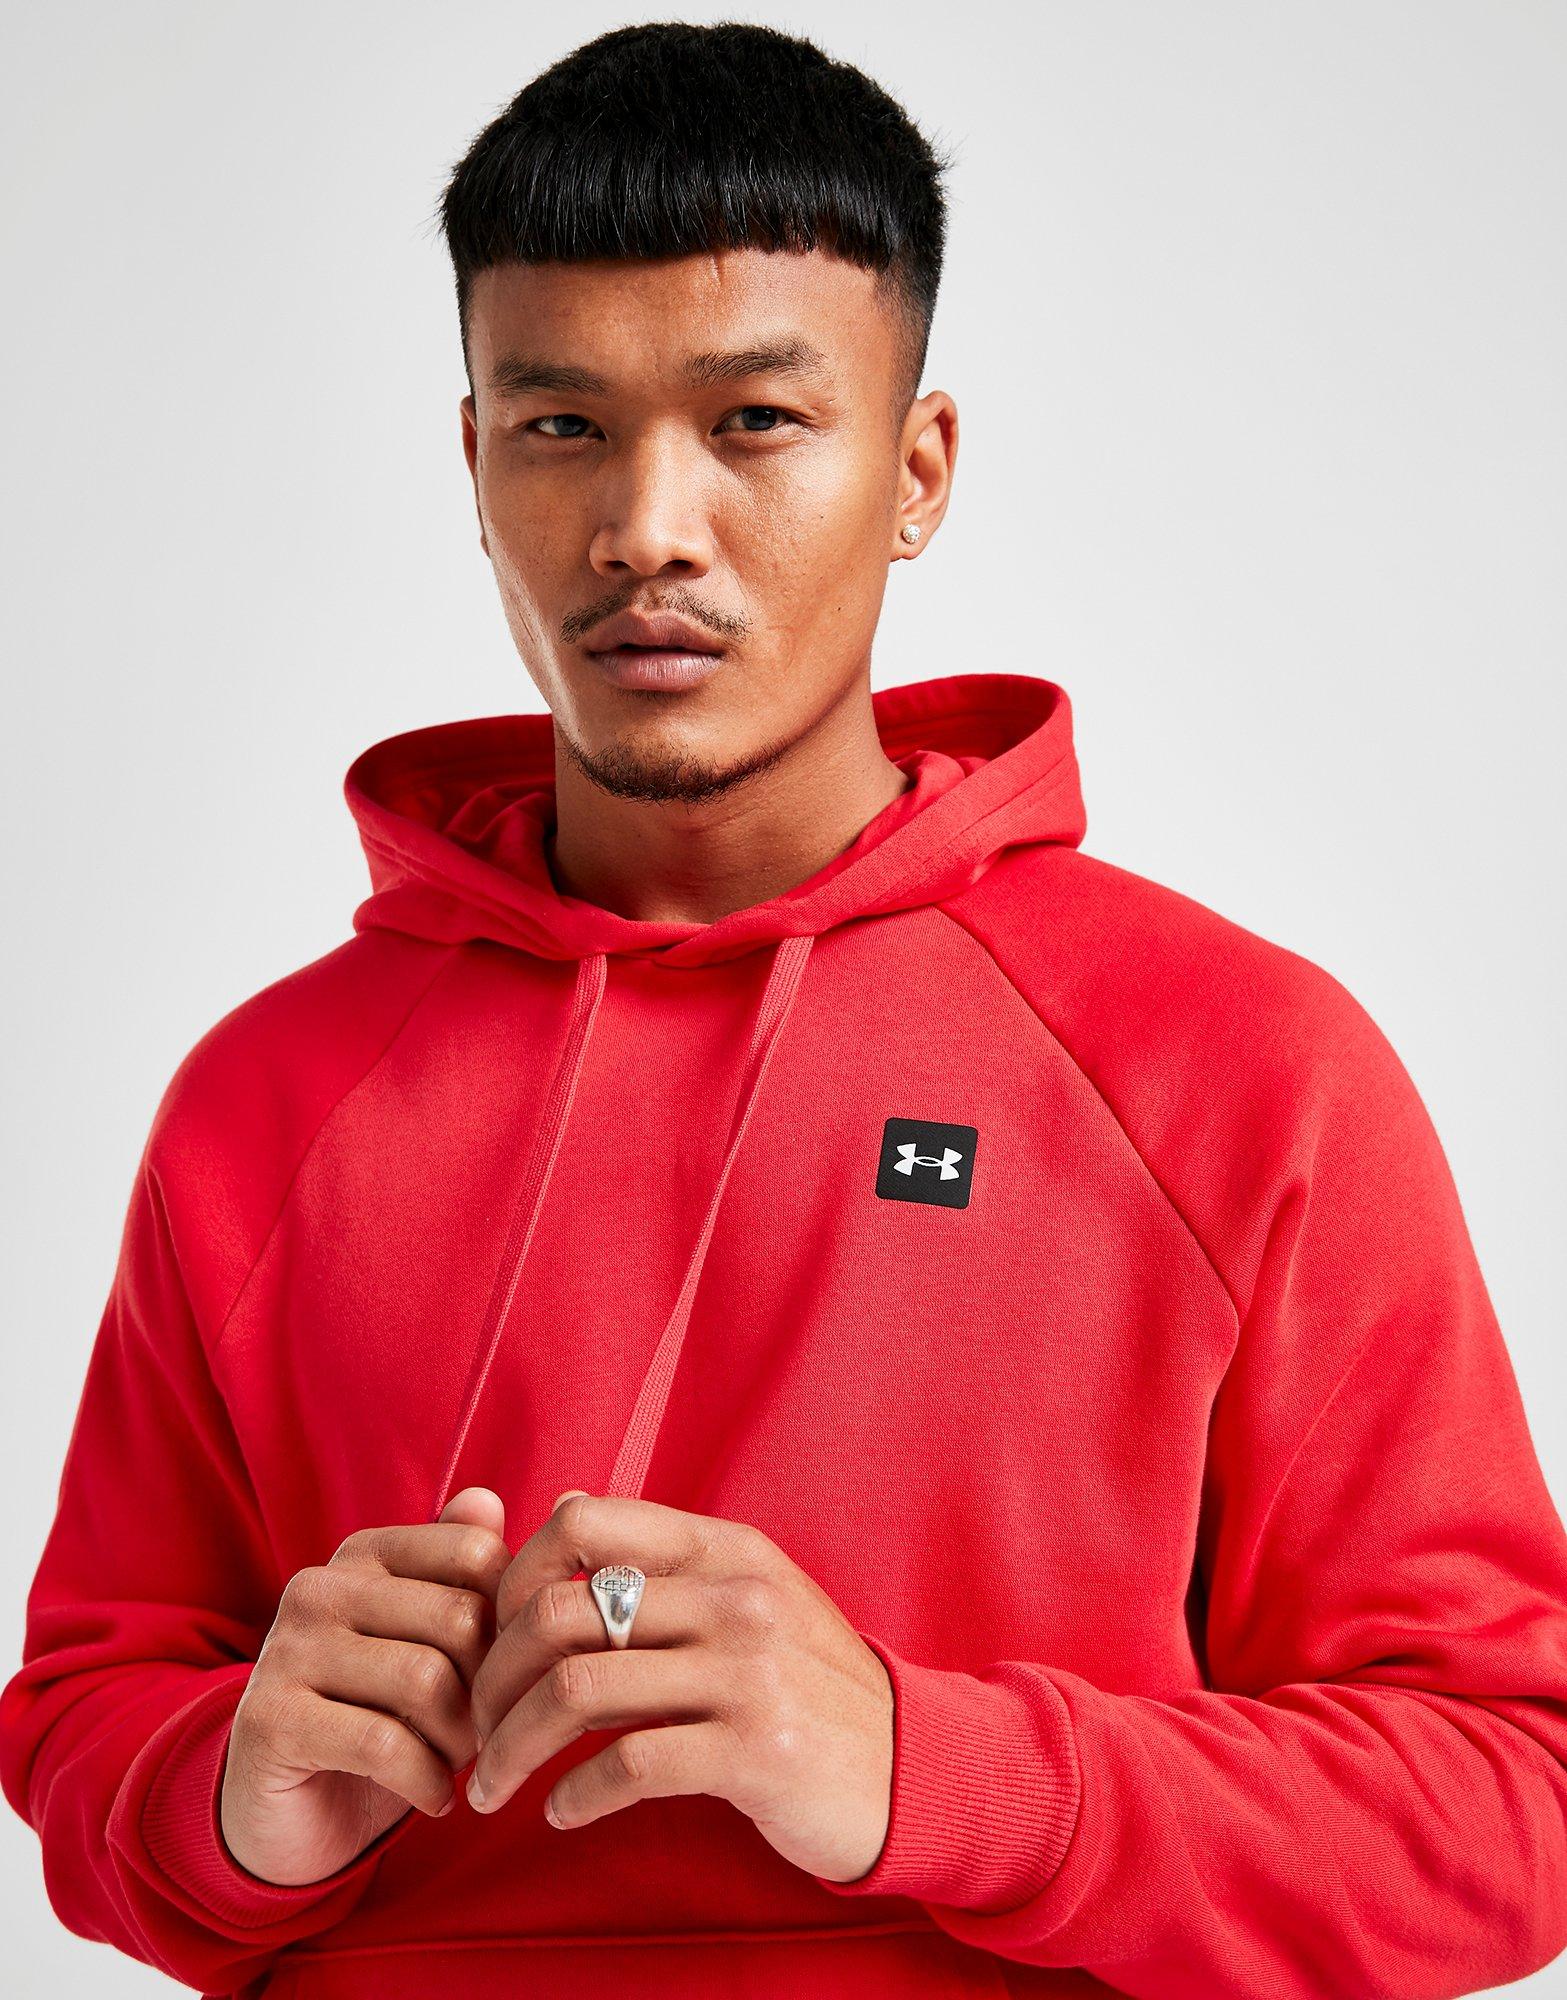 under armour rival overhead hoodie